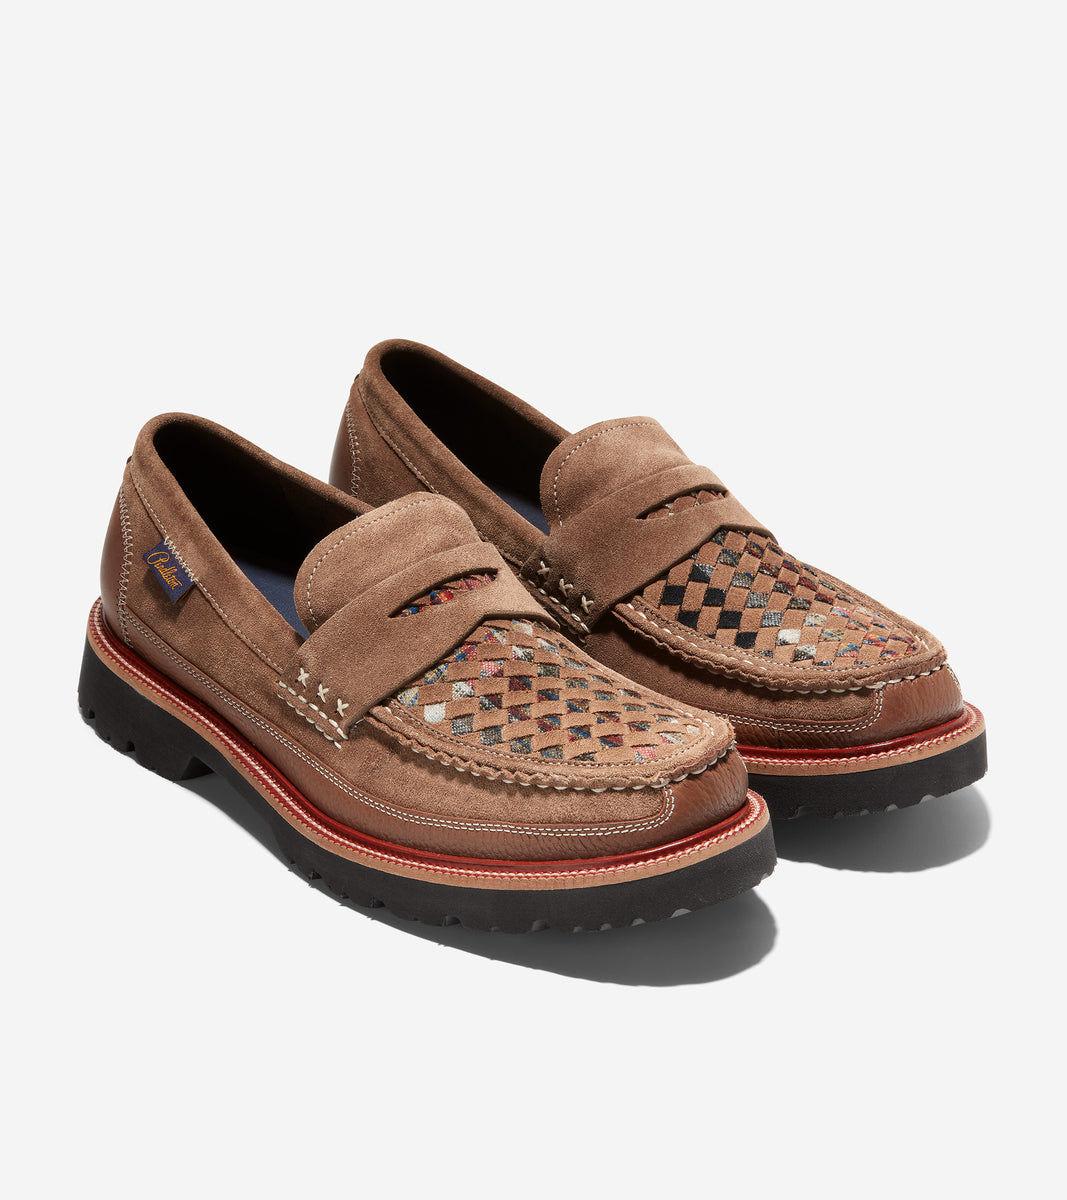 Men's Cole Haan x Pendleton American Classics Penny Loafer 